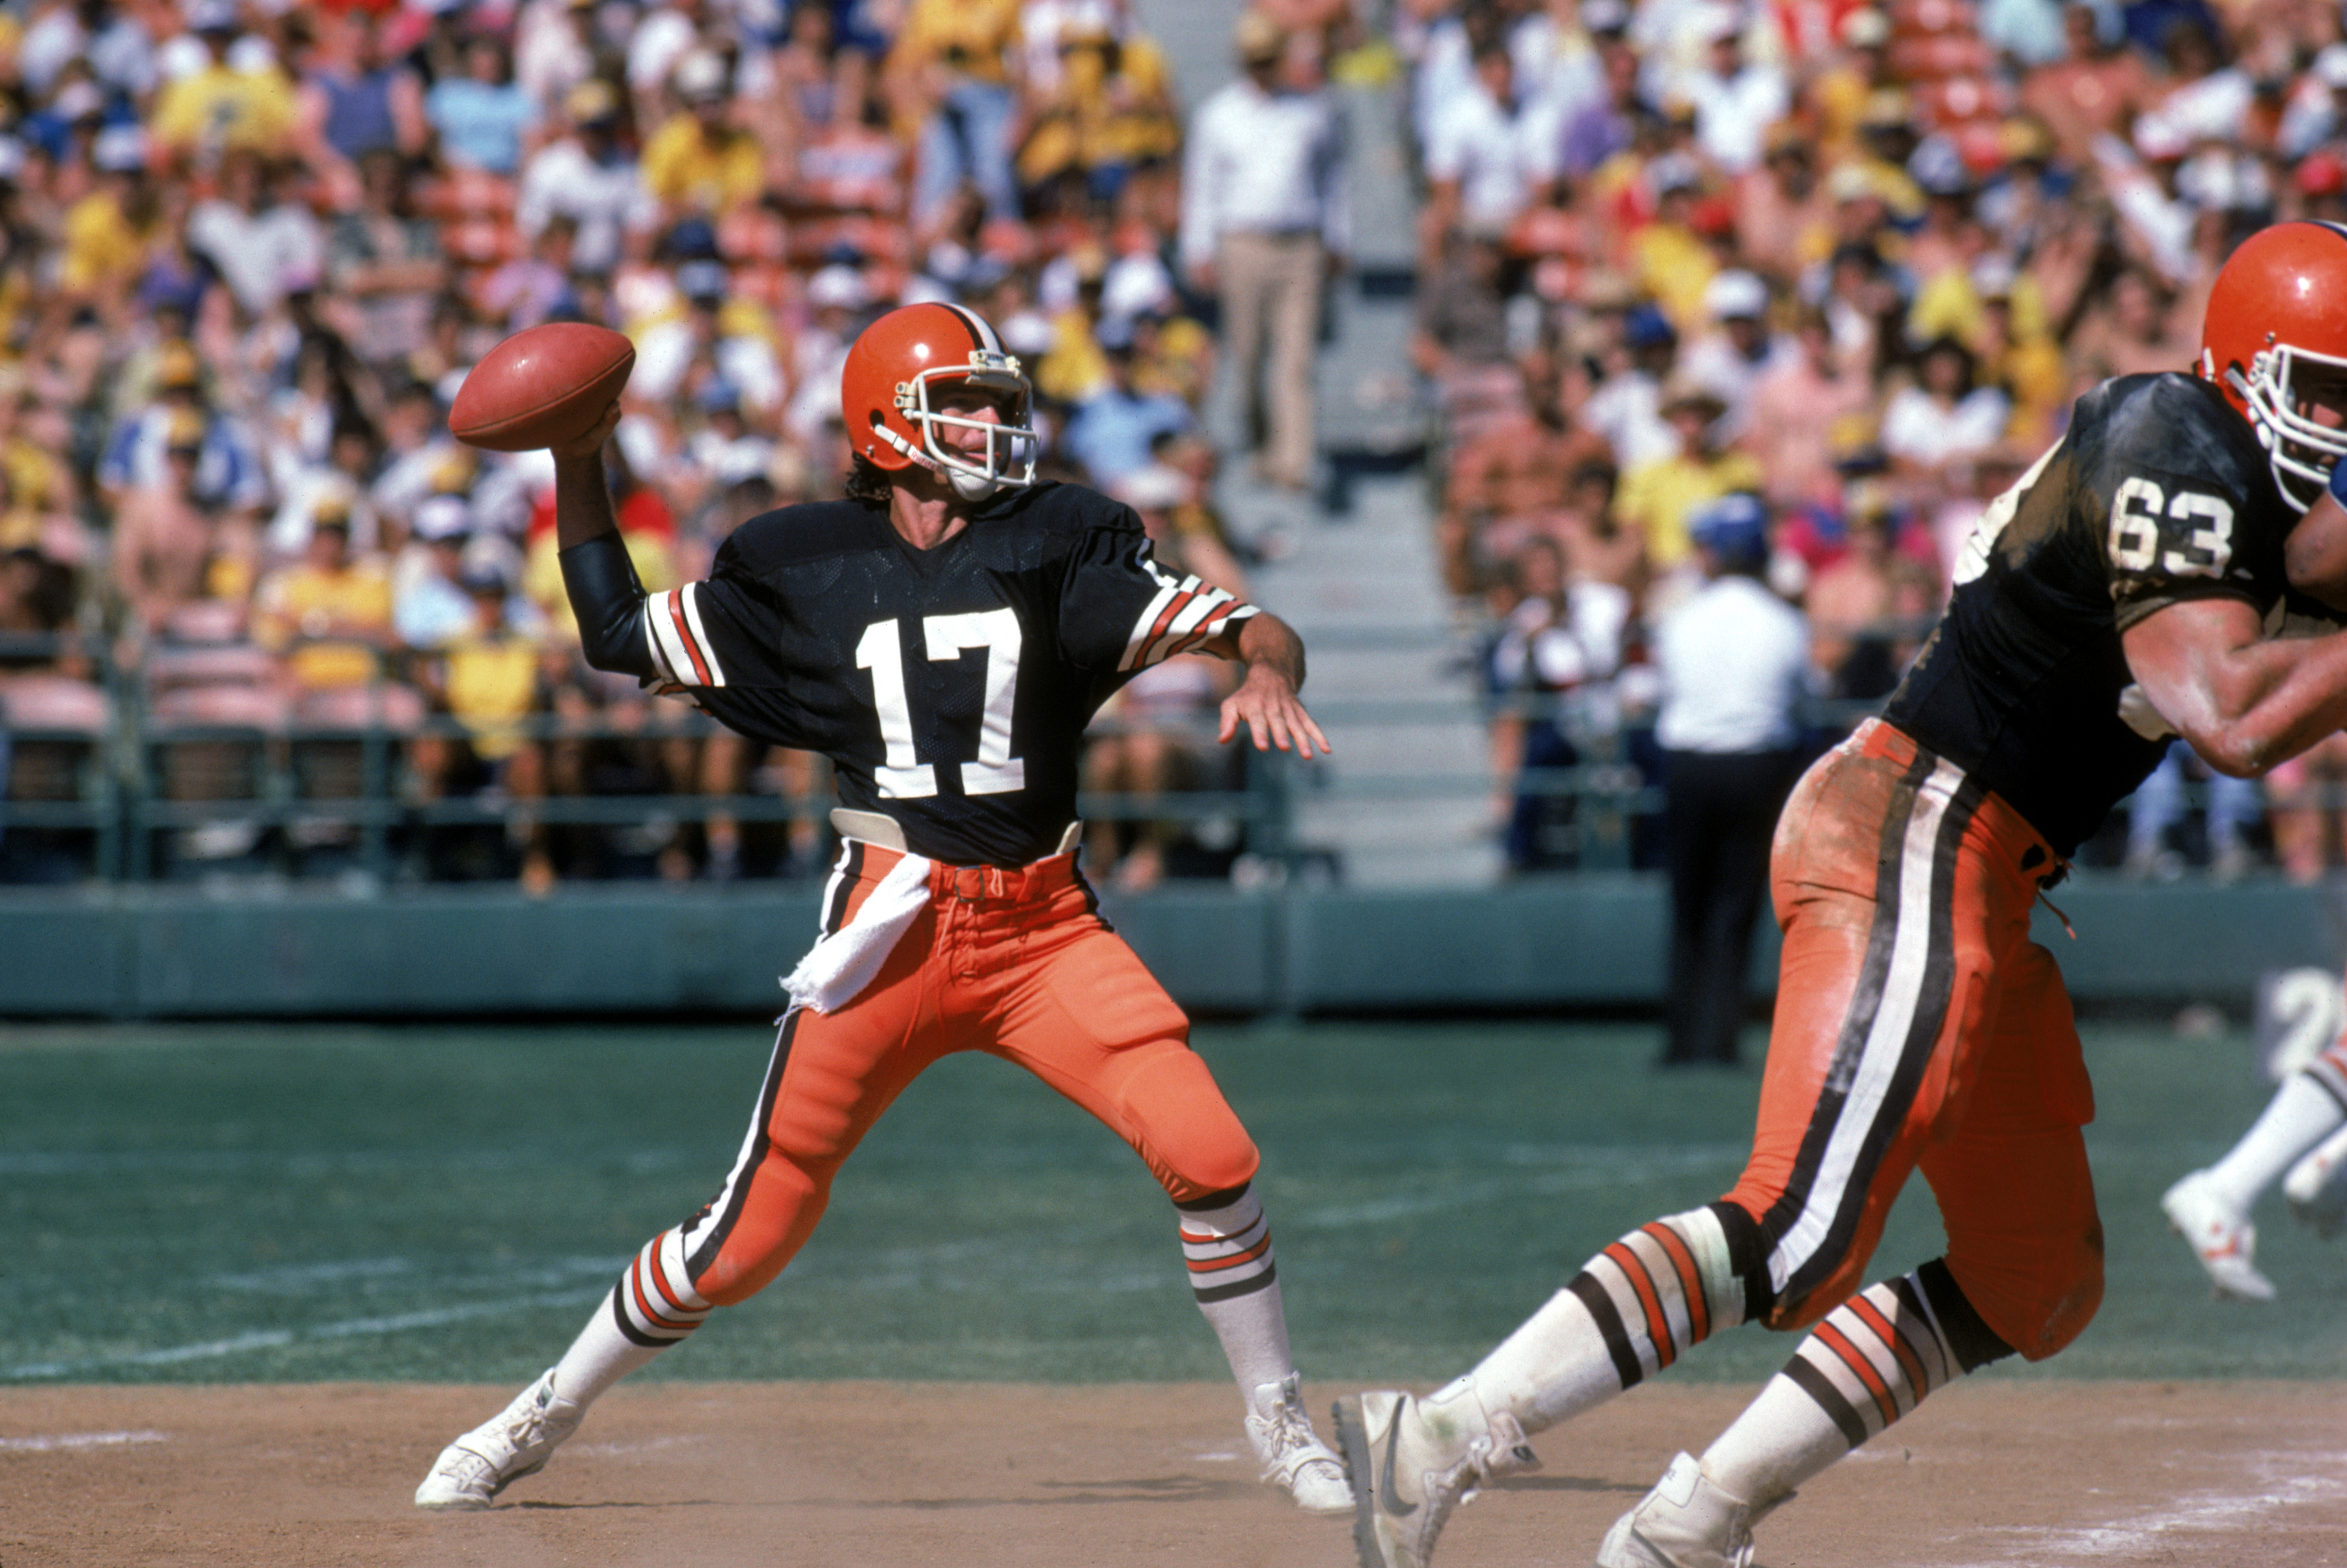 SAN DIEGO - SEPTEMBER 25:  Quarterback Brian Sipe #17 of the Cleveland Browns throws a pass under the protection of offensive tackle Cody Risien #63 during a game against the San Diego Chargers at Jack Murphy on September 25, 1983 in San Diego, California